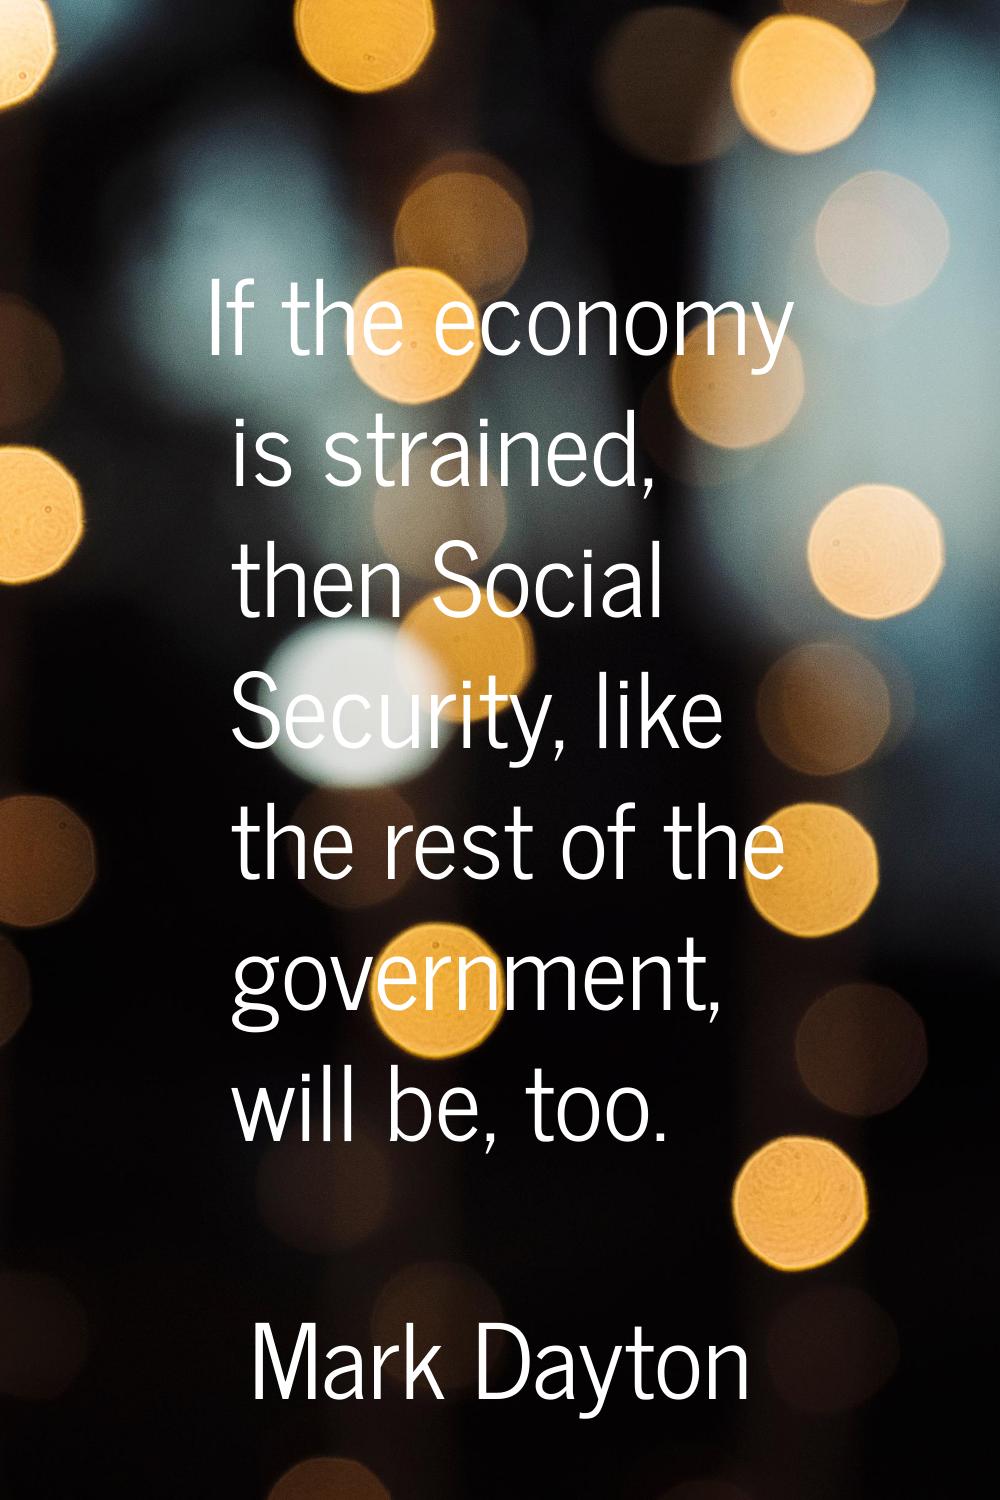 If the economy is strained, then Social Security, like the rest of the government, will be, too.